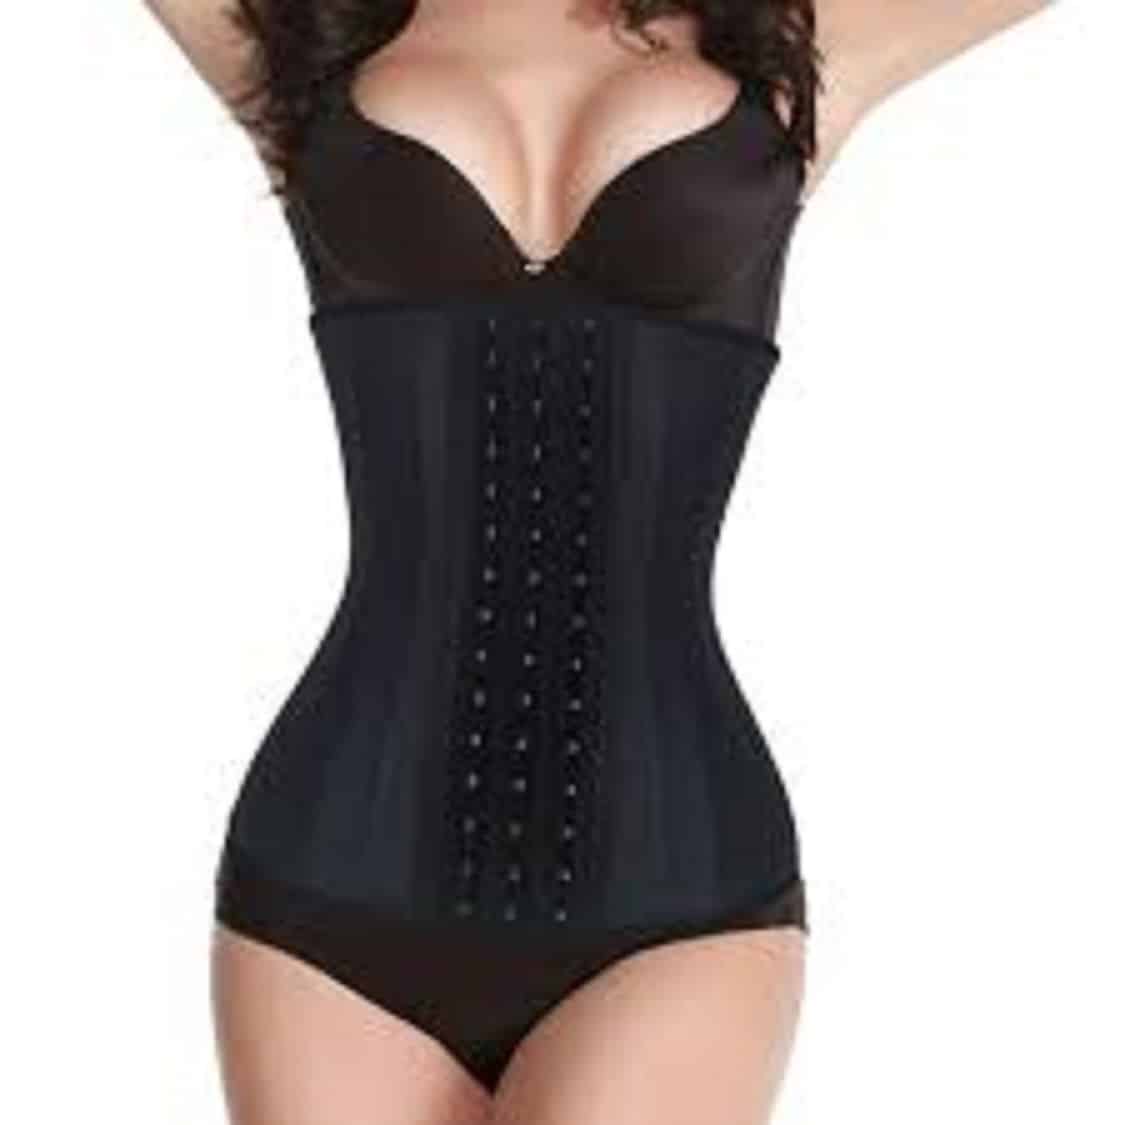 Waist Trainer – Buying Guide